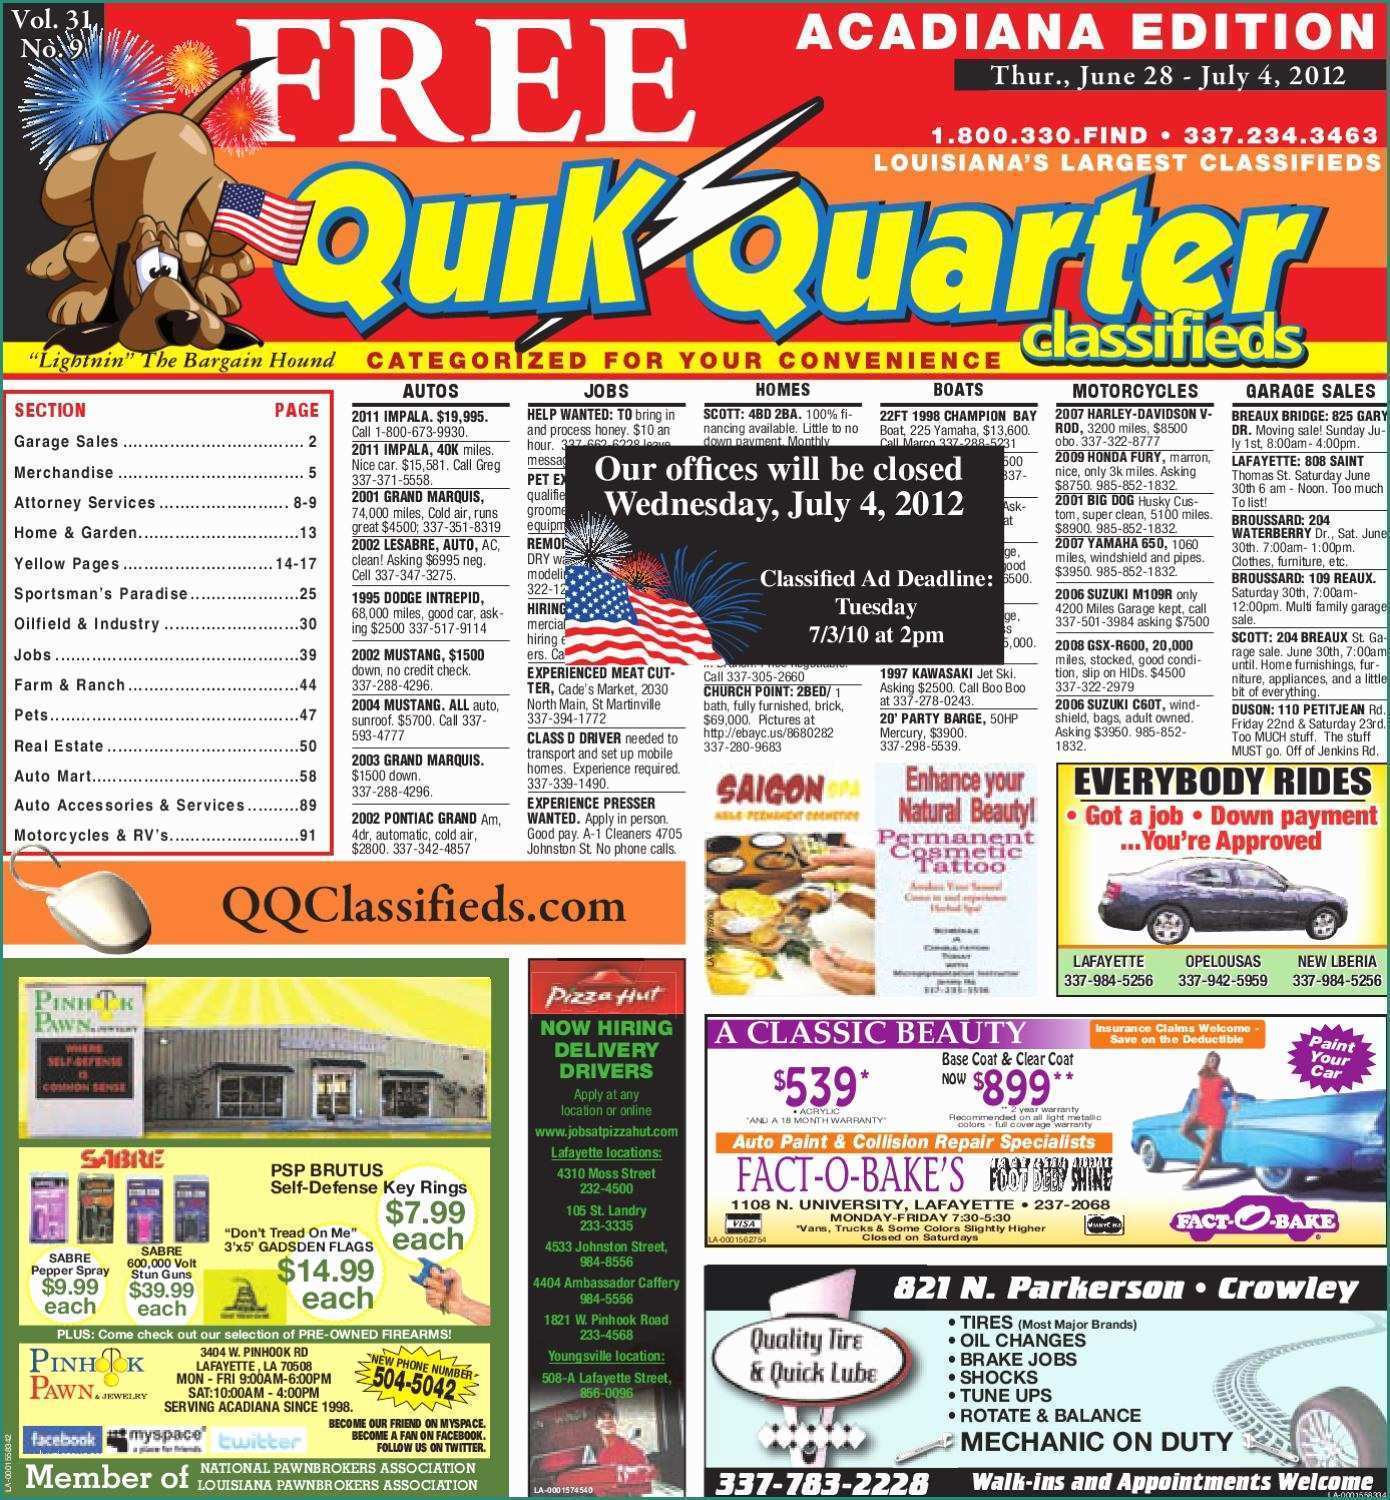 Lube Store Milano E Qq Acadiana by Part Of the Usa today Network issuu